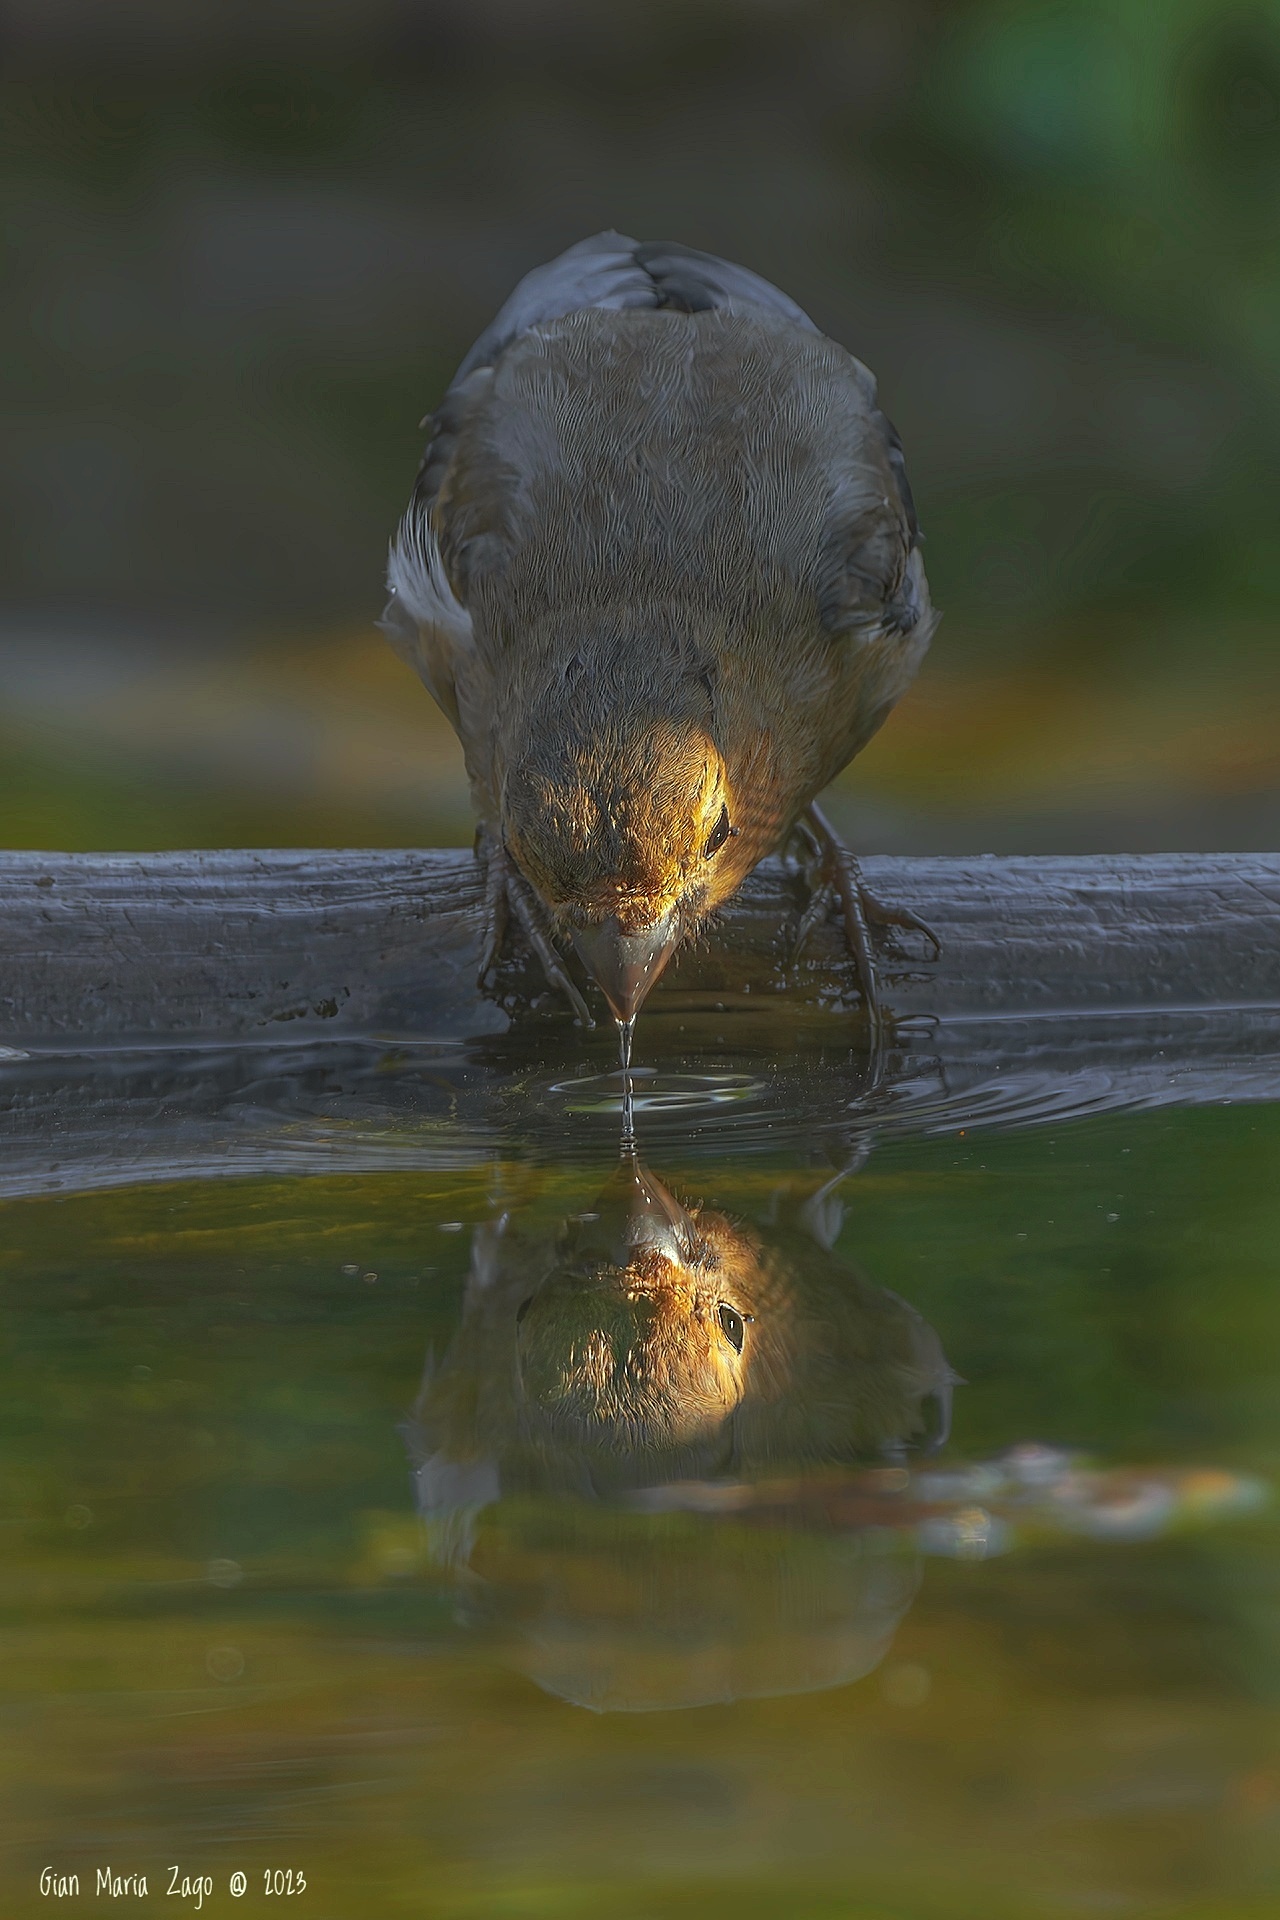 The thirst of the hawfrog ...